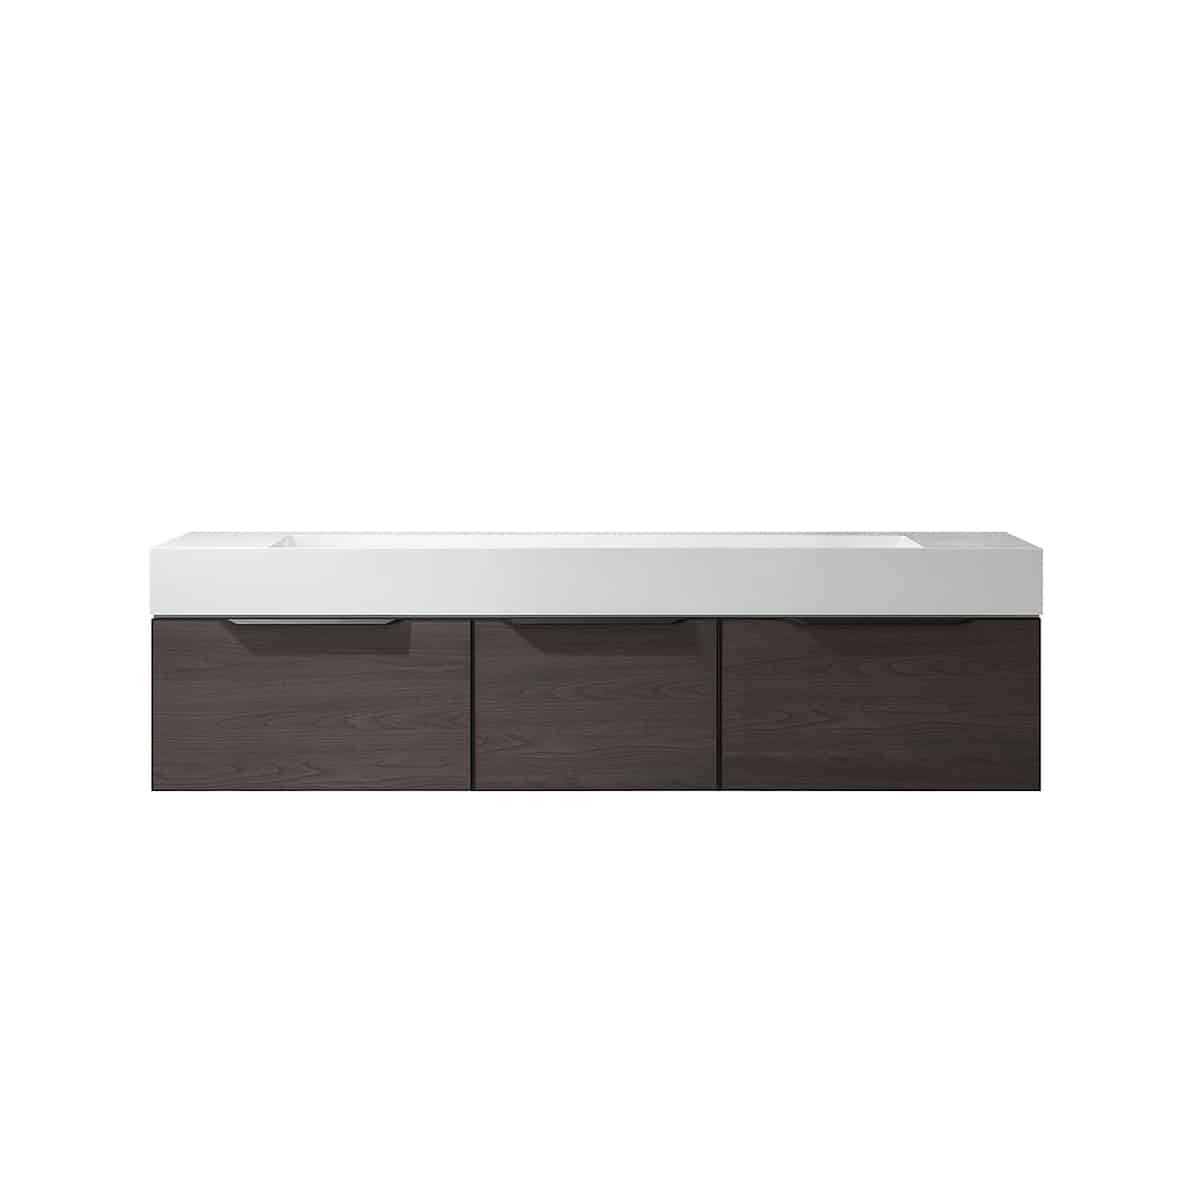 Vinnova Vegadeo 72 Inch Wall Mount Double Sink Bath Vanity in Suleiman Oak Finish with White One-Piece Composite Stone Sink Top Without Mirror 703472-SO-WH-NM